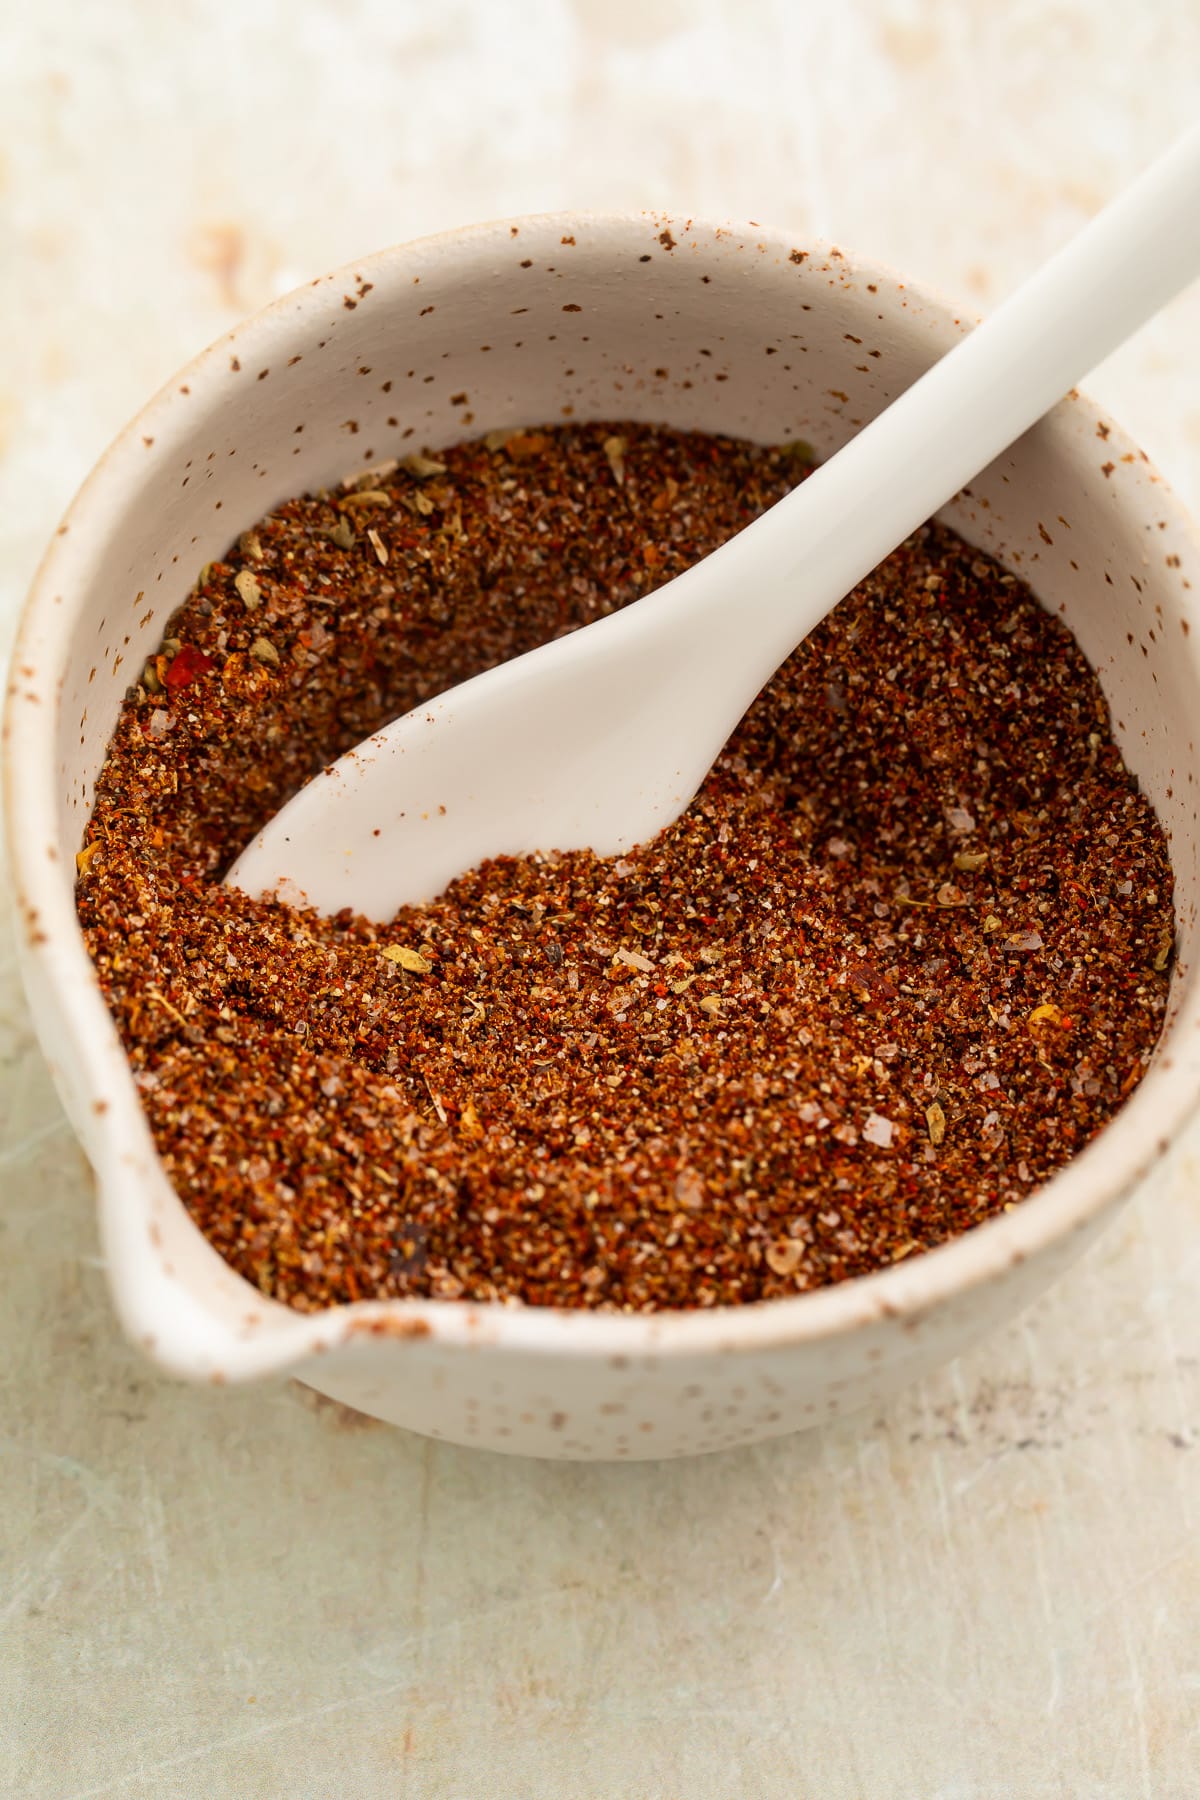 Overhead view of a small bowl filled with a rich, deep reddish-brown blend of spices for chicken taco seasoning.